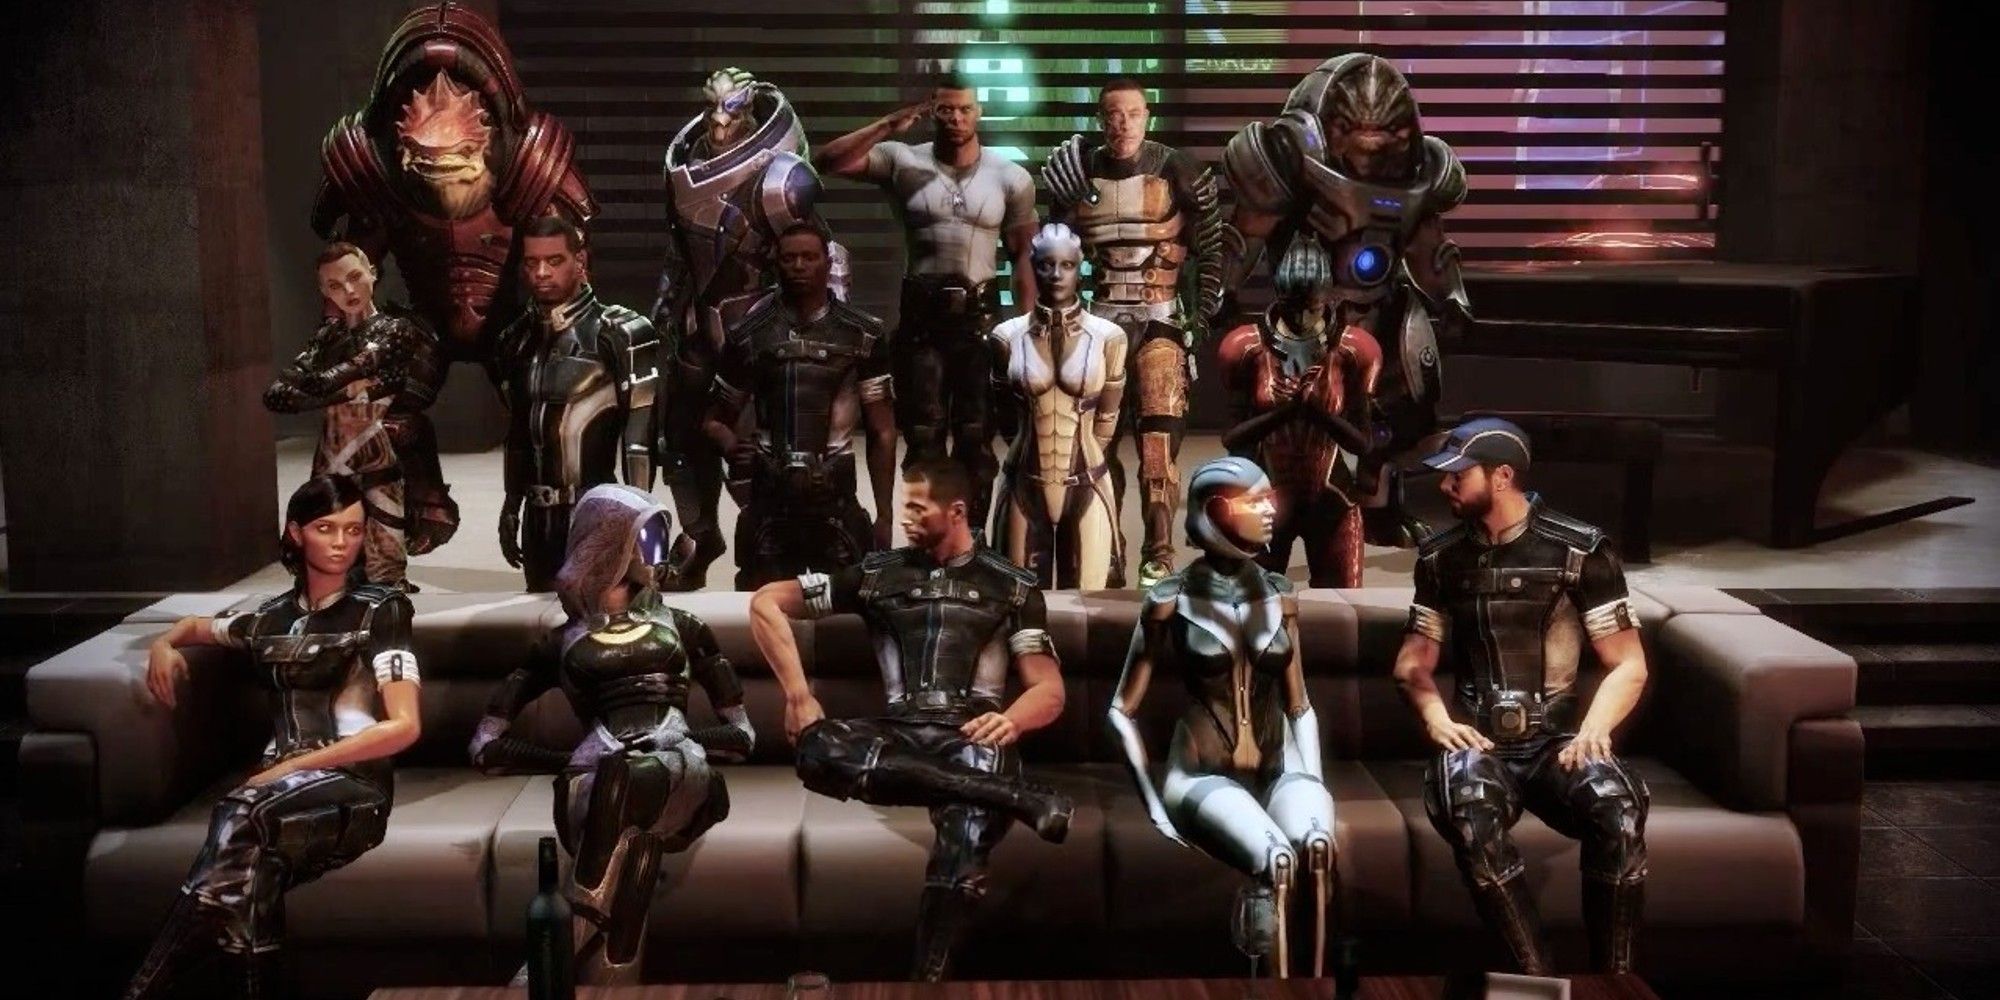 Mass Effect 3 - The Citadel party